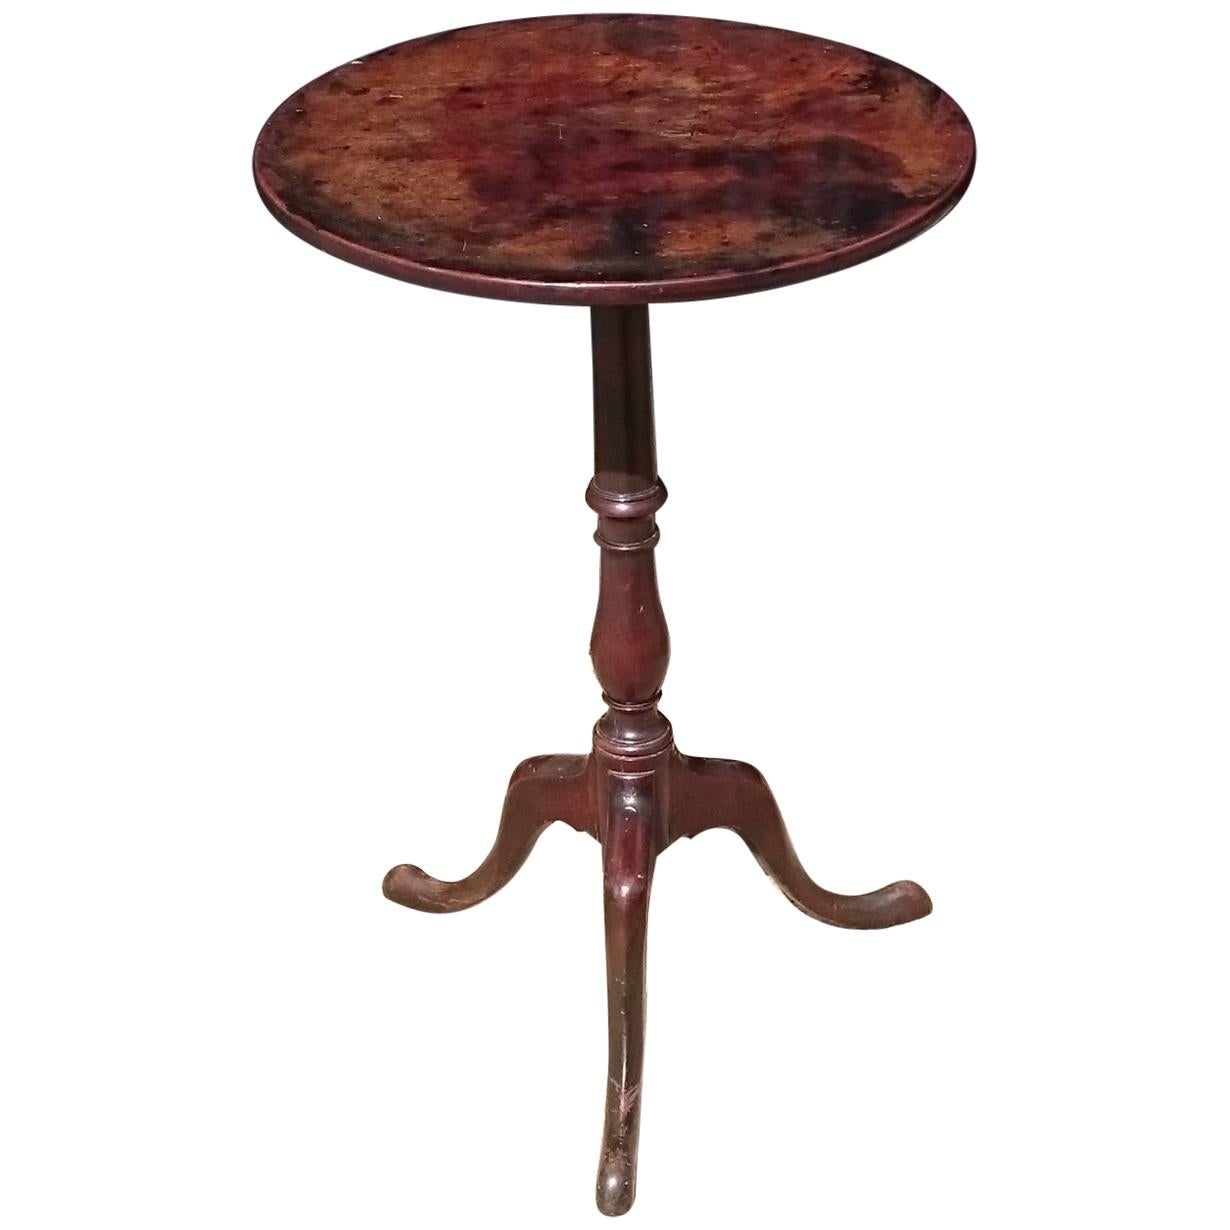 18th Century George III Period Mahogany Antique Wine Table / Tripod Table For Sale